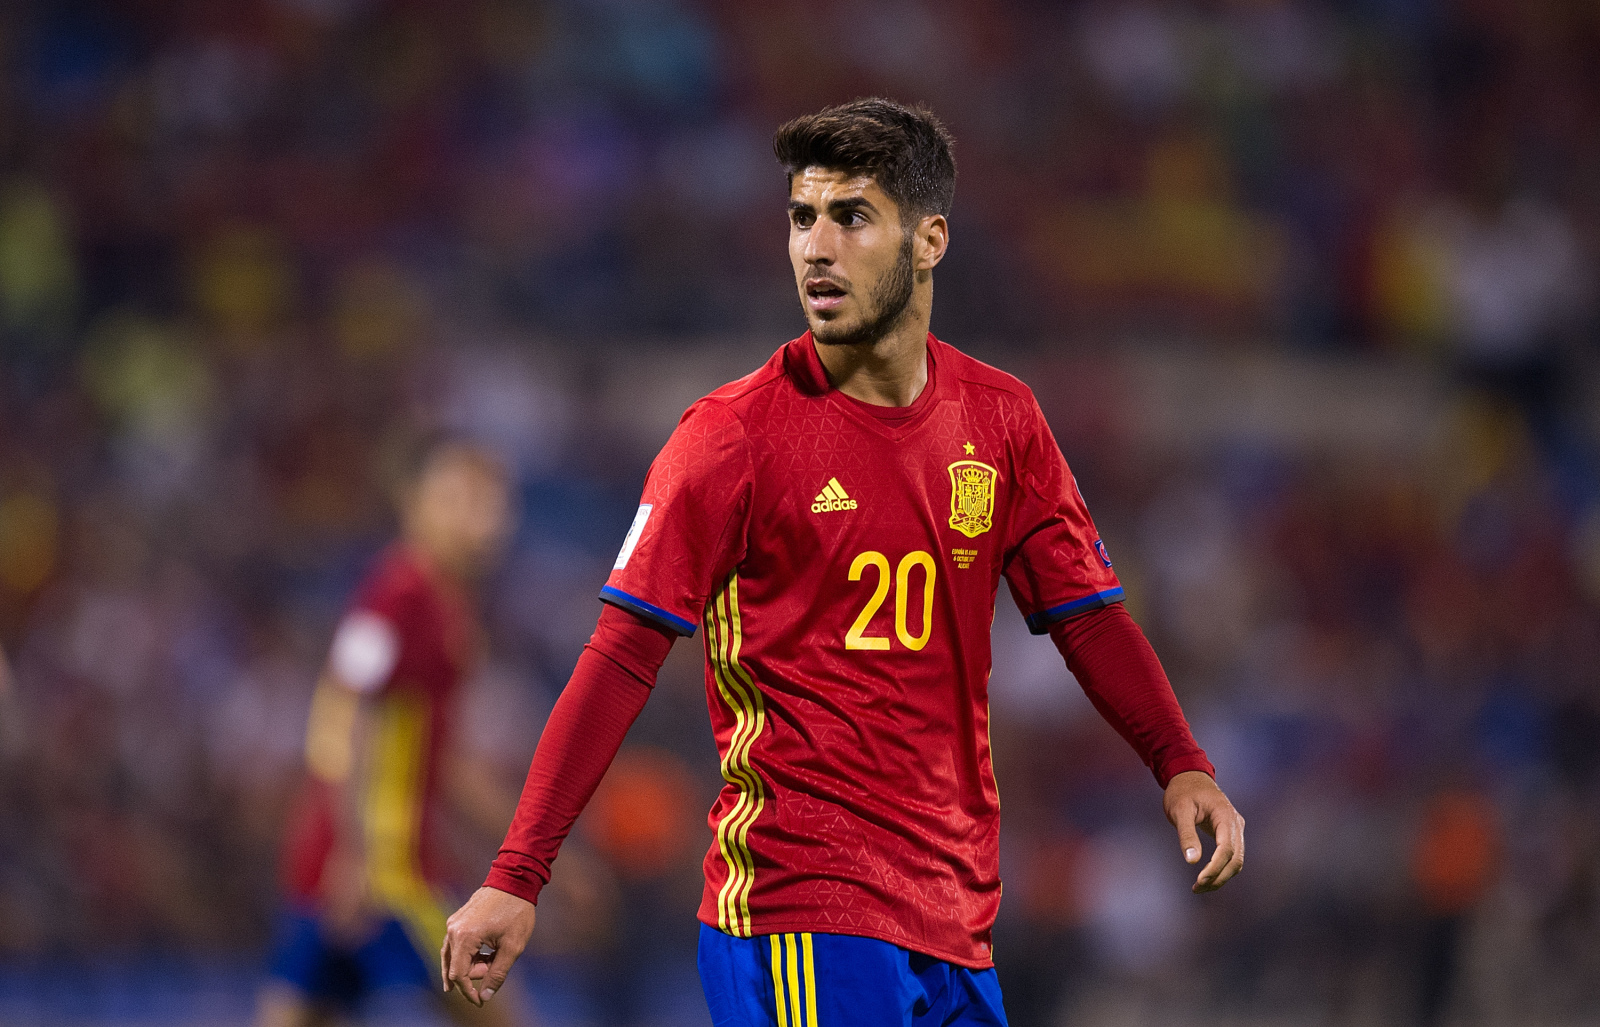 Marco Asensio could be handed a starting XI role in this match